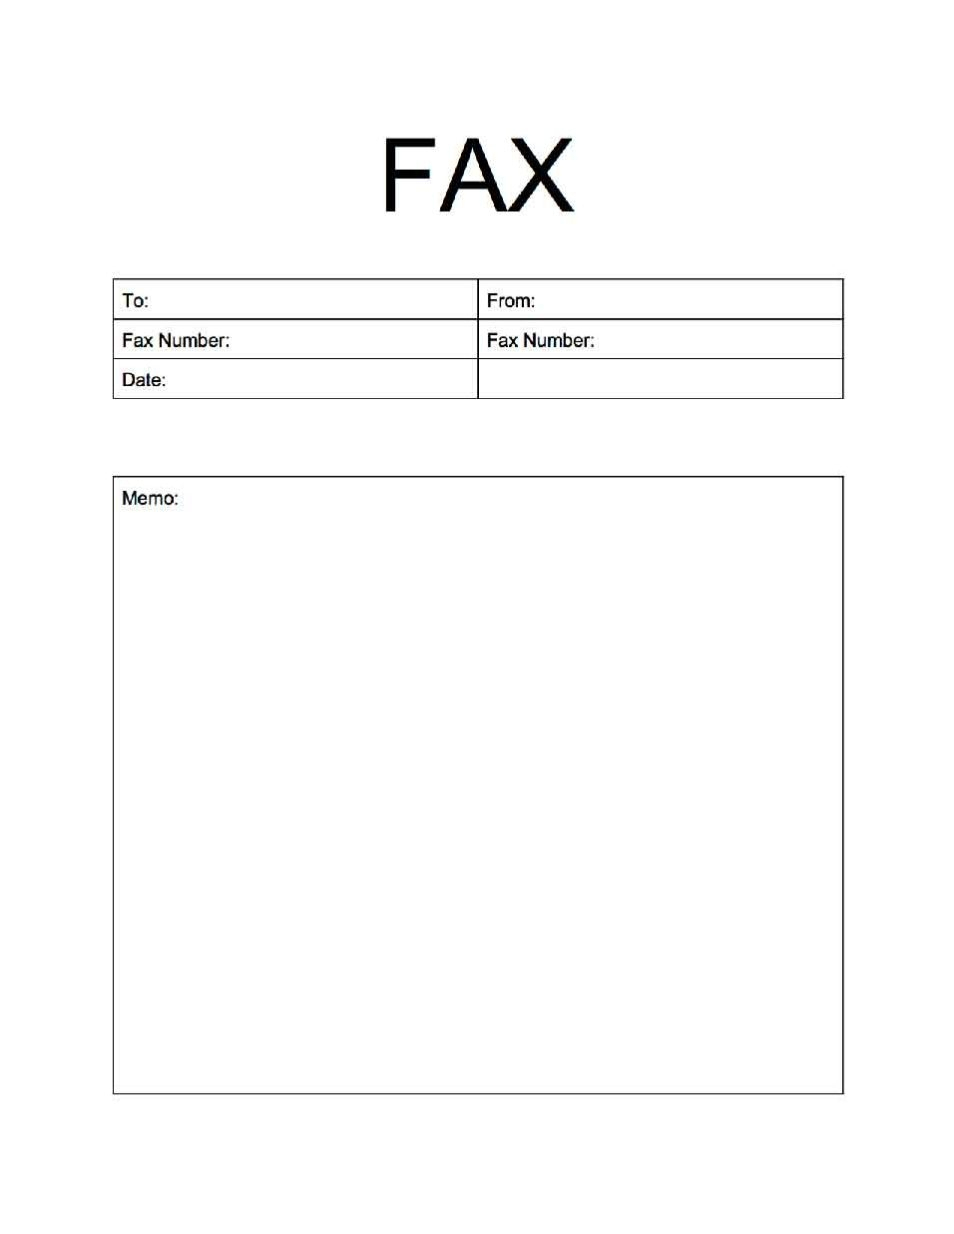 Cover Sheet Cover Sheet Free Printable Fax Cover Sheet Template Pdf - Free Printable Cover Letter For Fax